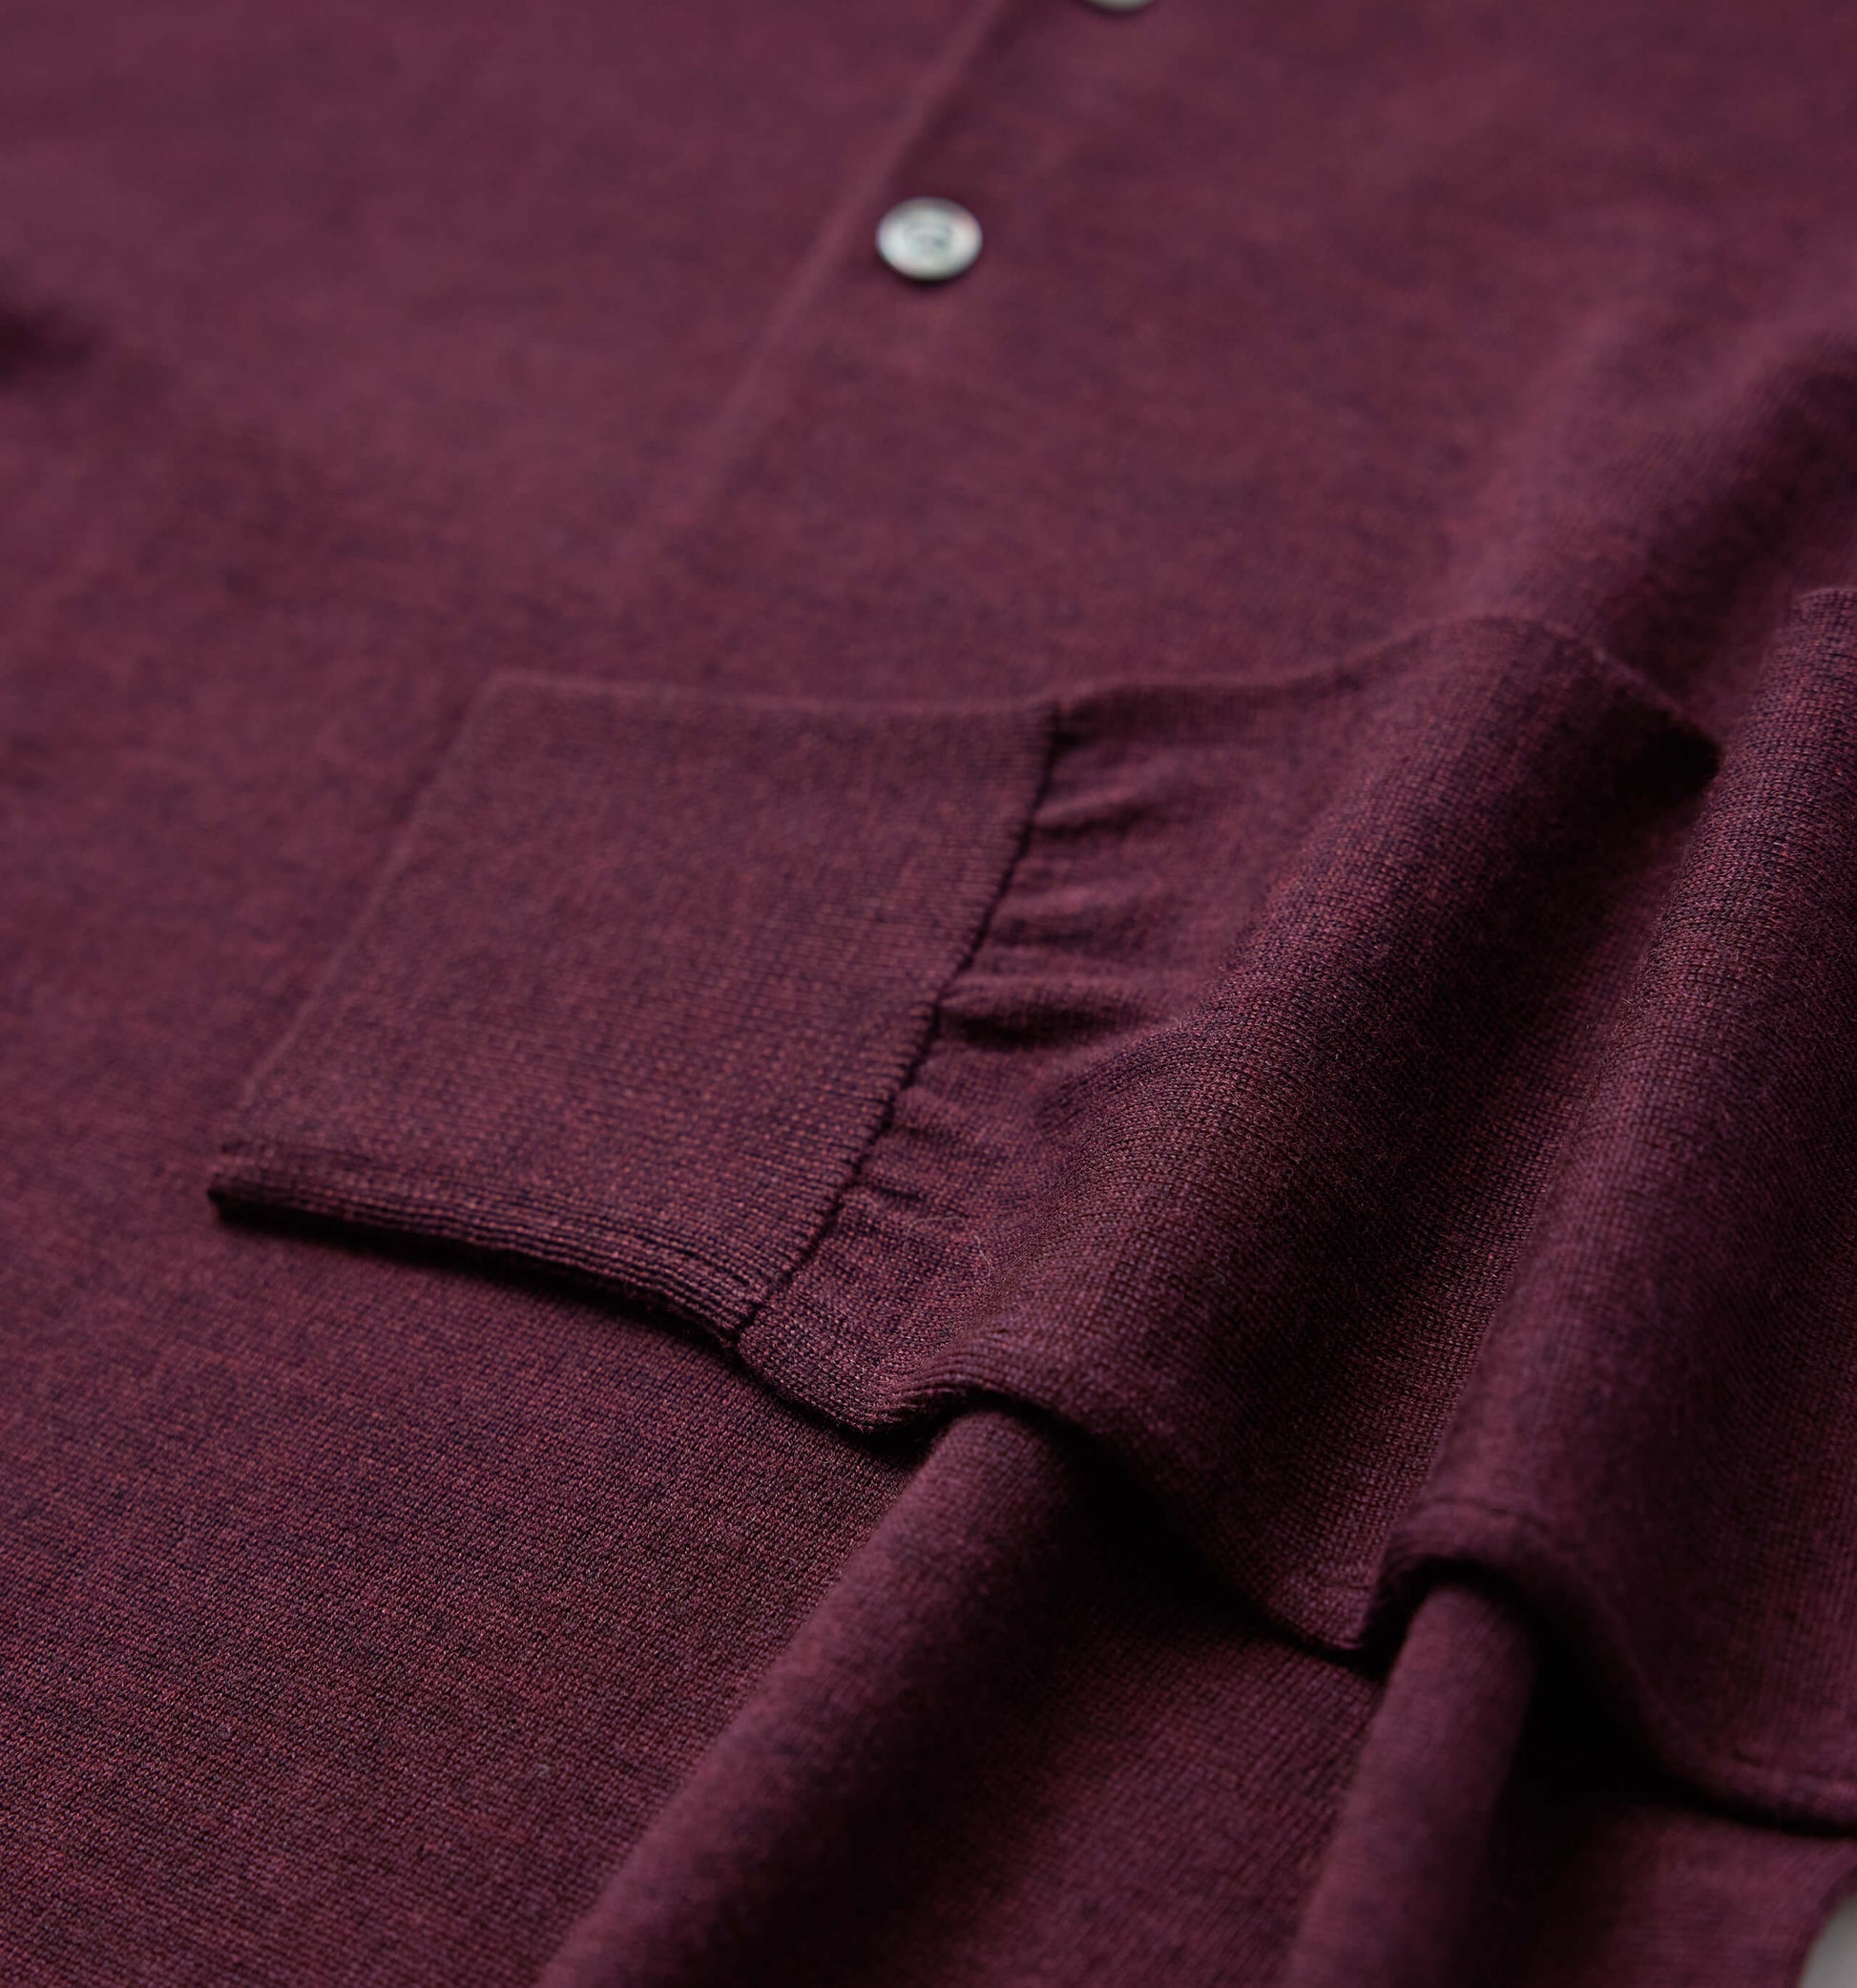 The Robert - Merino Wool Polo In Burgundy From King Essentials